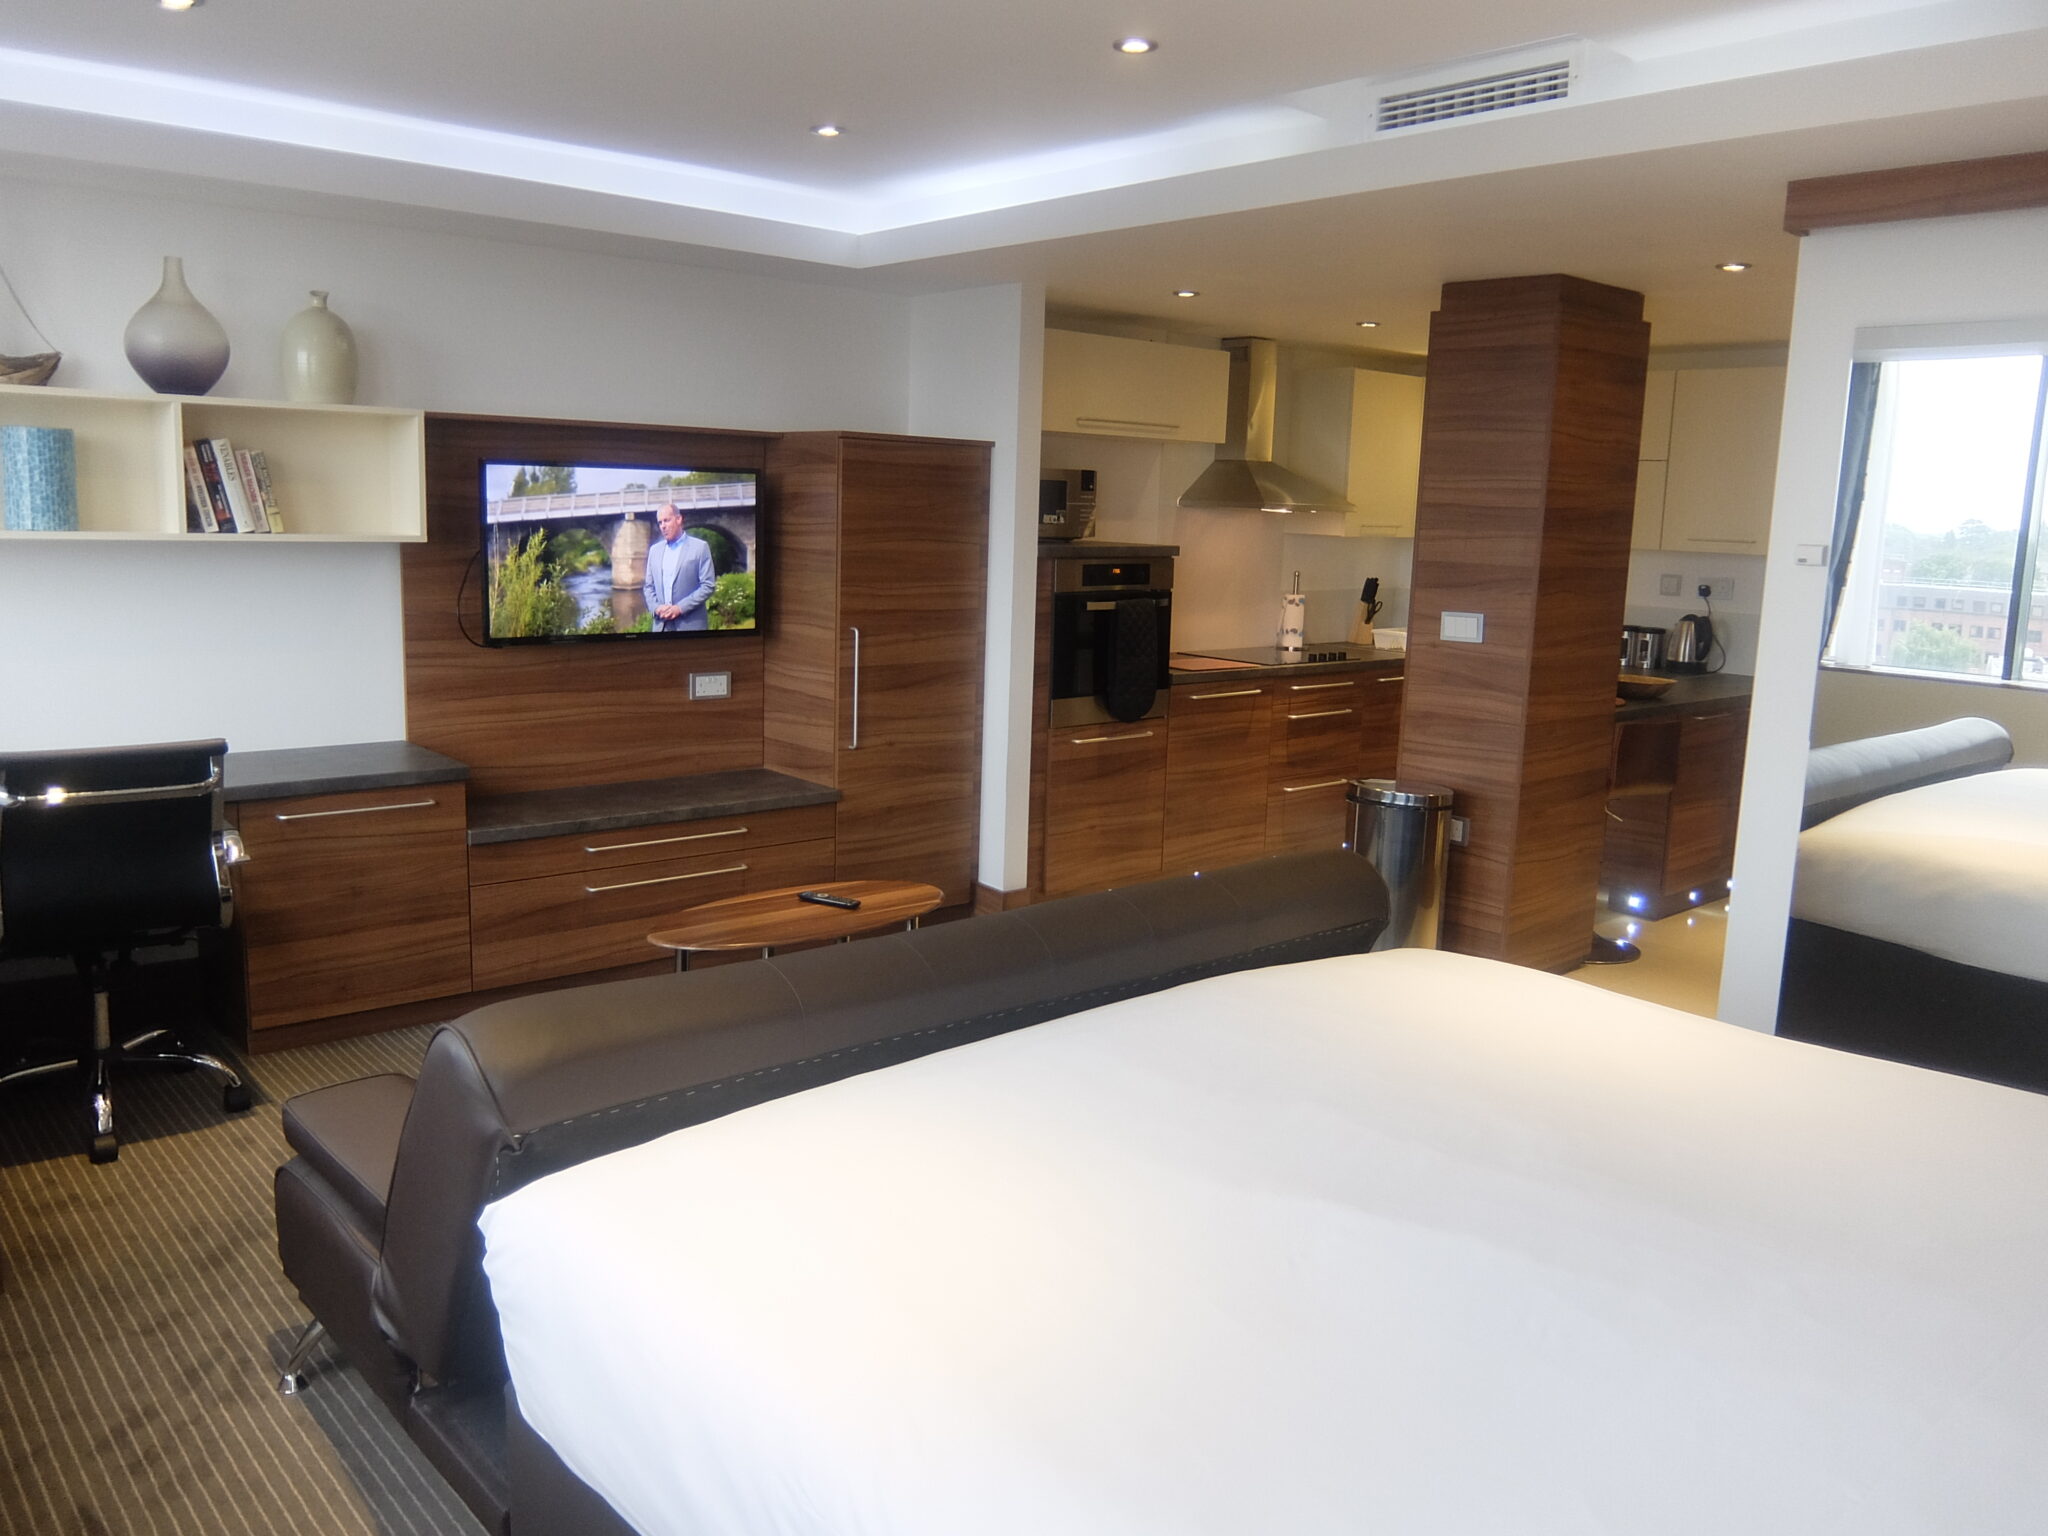 Harrow Mount House Apartments - West London Serviced Apartments - Watford | Urban Stay